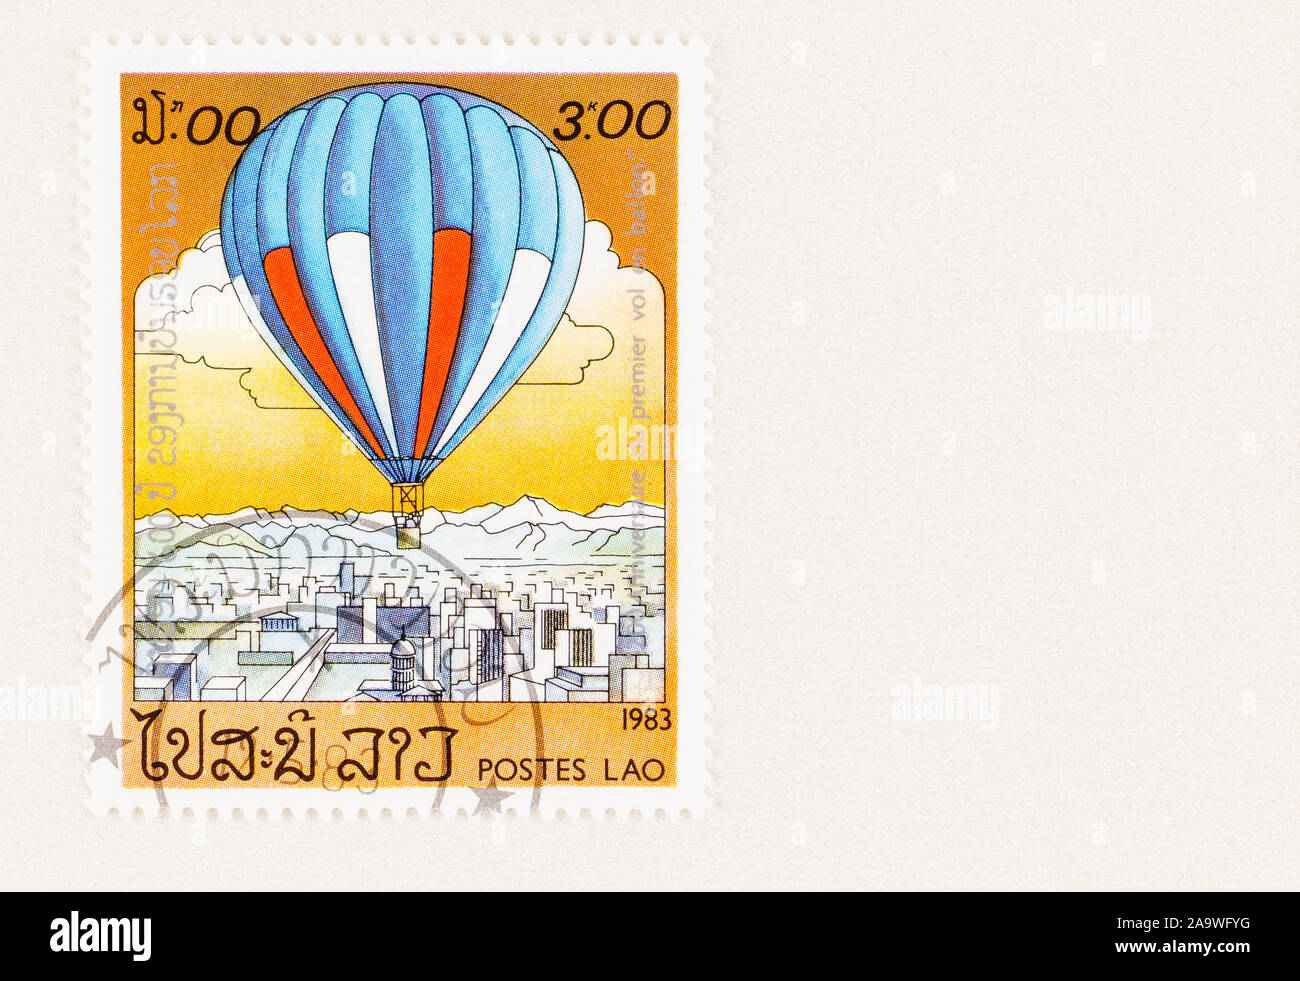 SEATTLE WASHINGTON - October 5, 2019: Blue,red and white hot air balloon floating over city on Laos postage stamp issued in 1983. Stock Photo